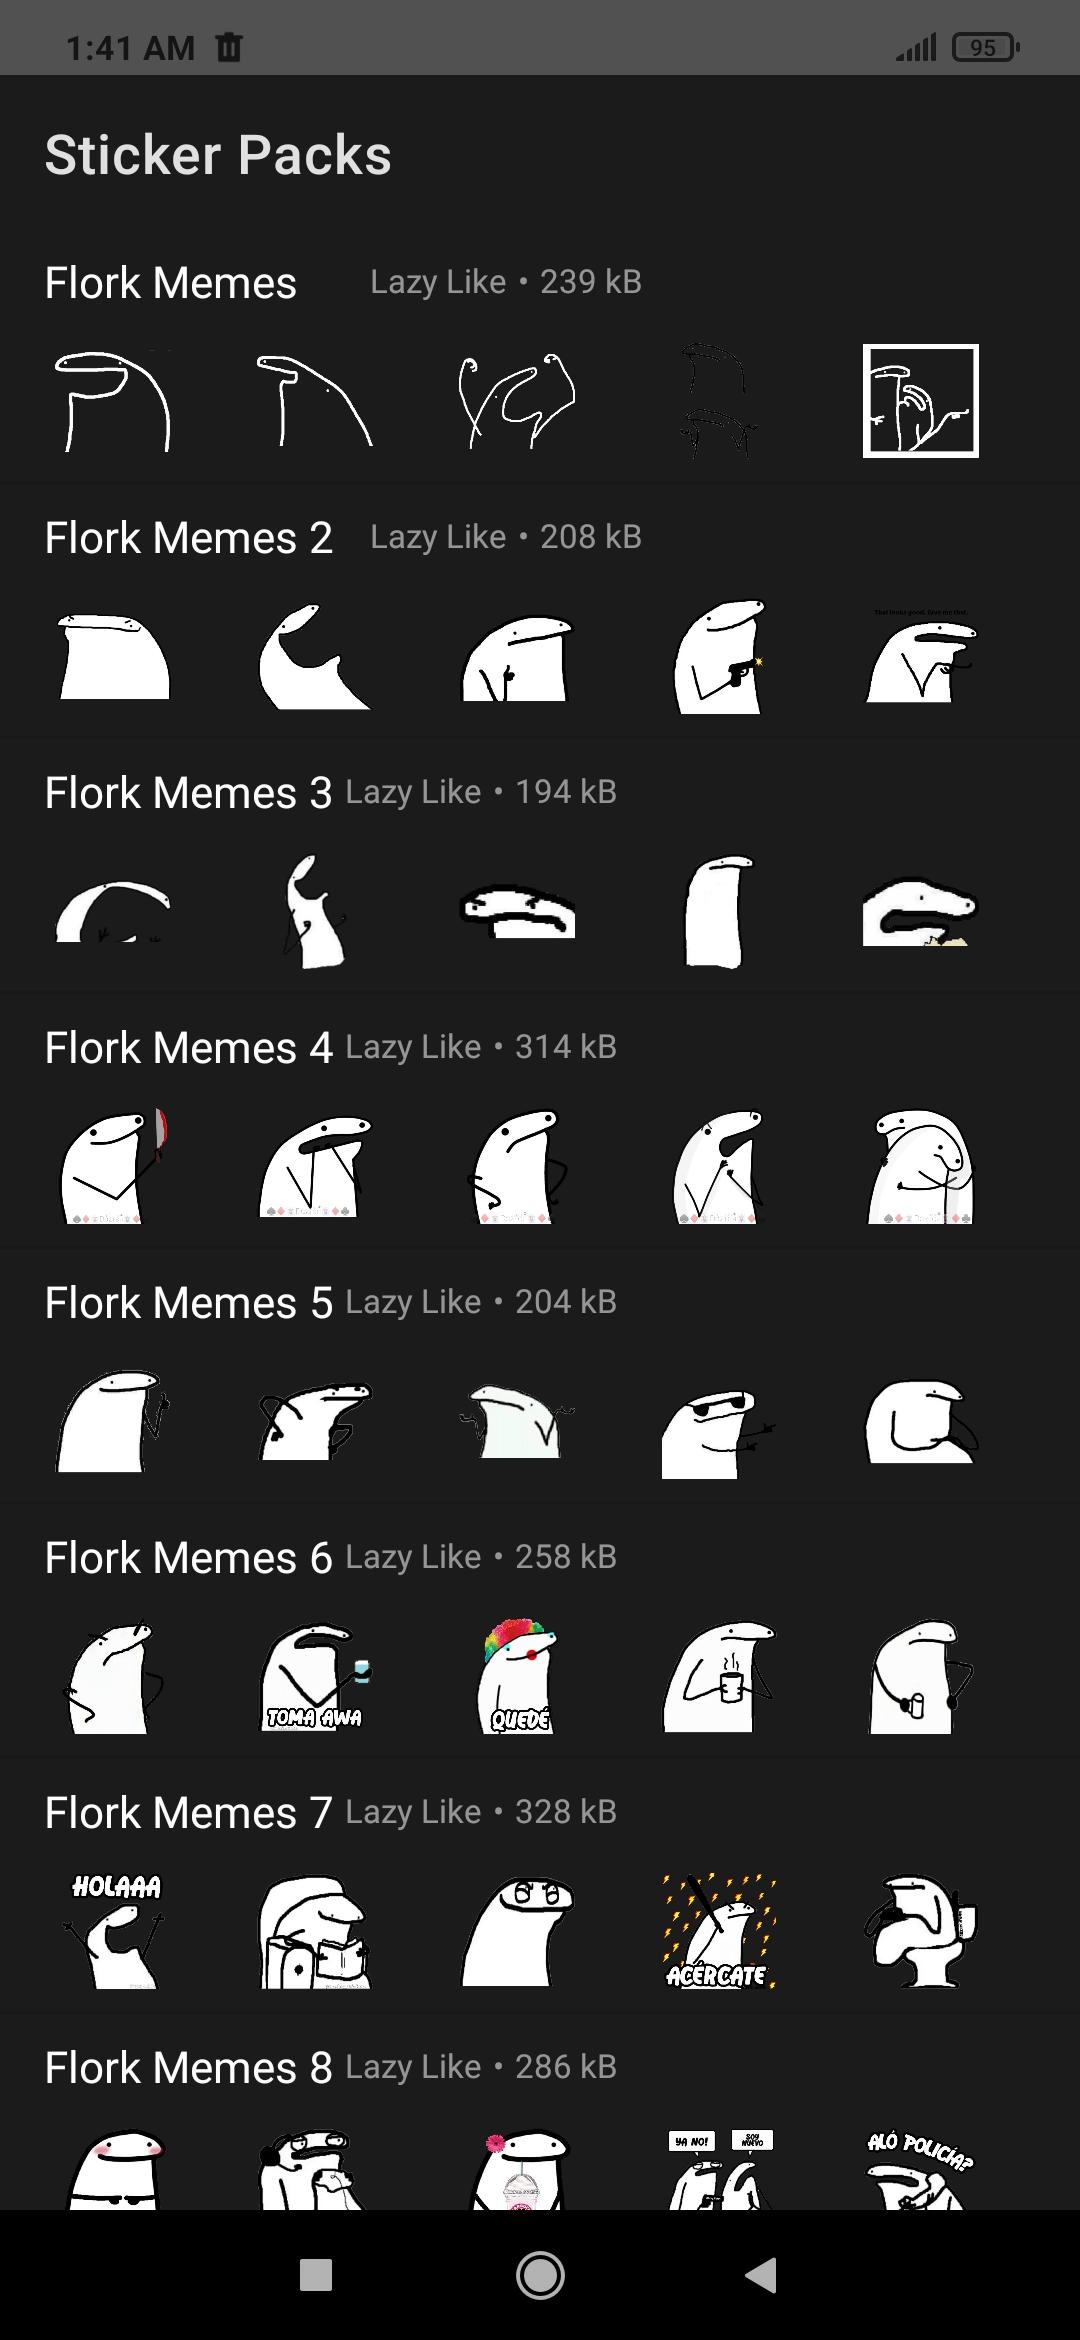 Stickers de Flork Memes para WhatsApp for Android - APK Download